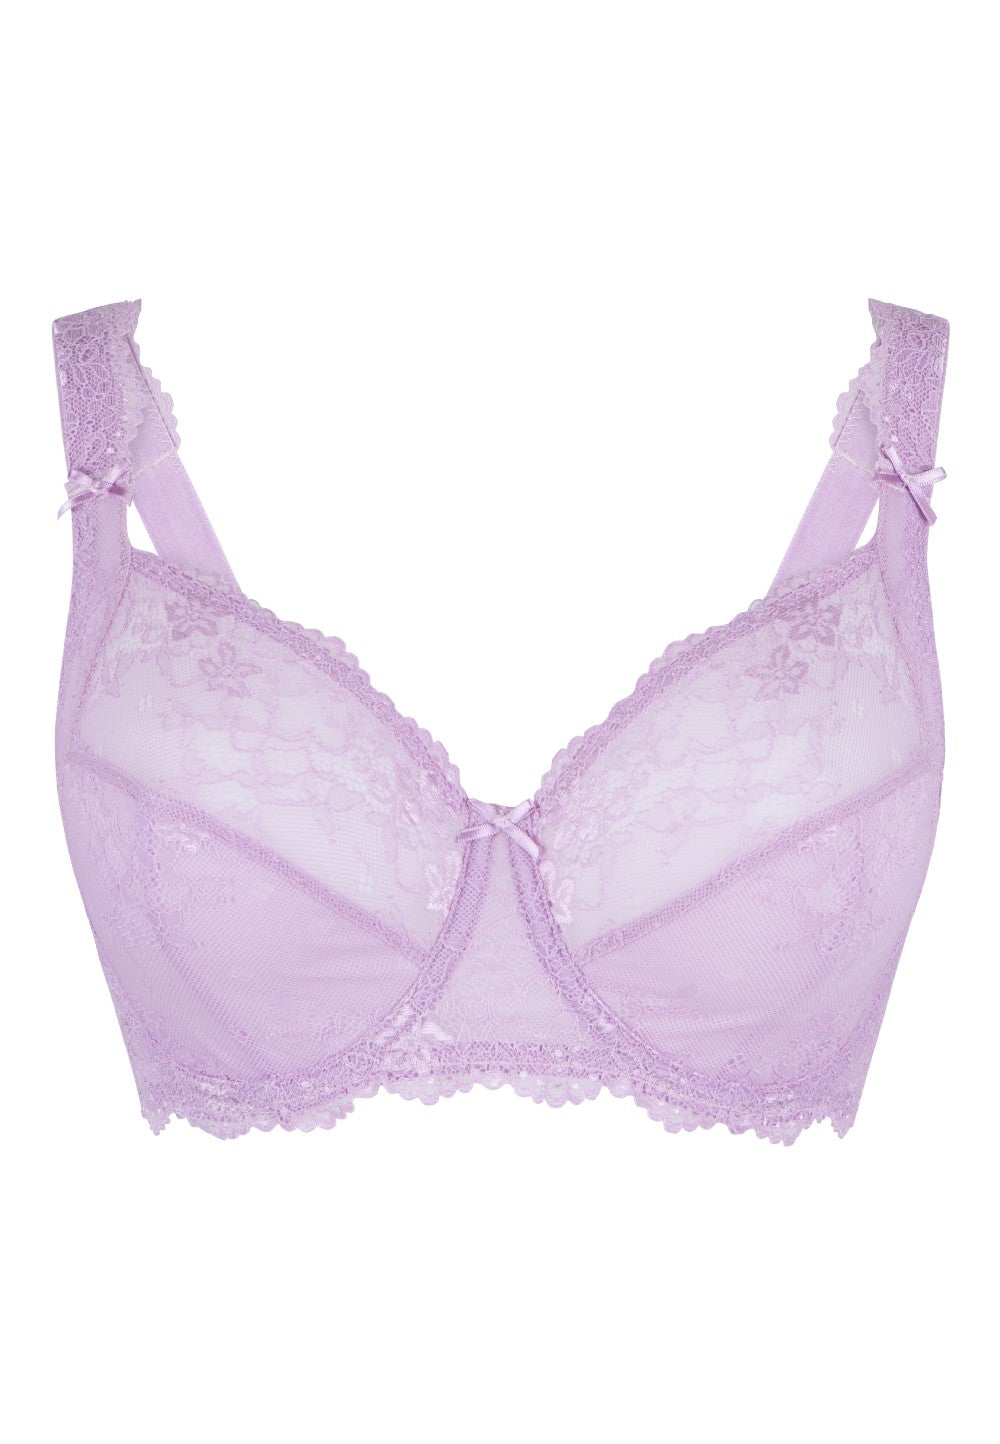 DAILY BH met beugel 1400-5A 143 Pink Lavender